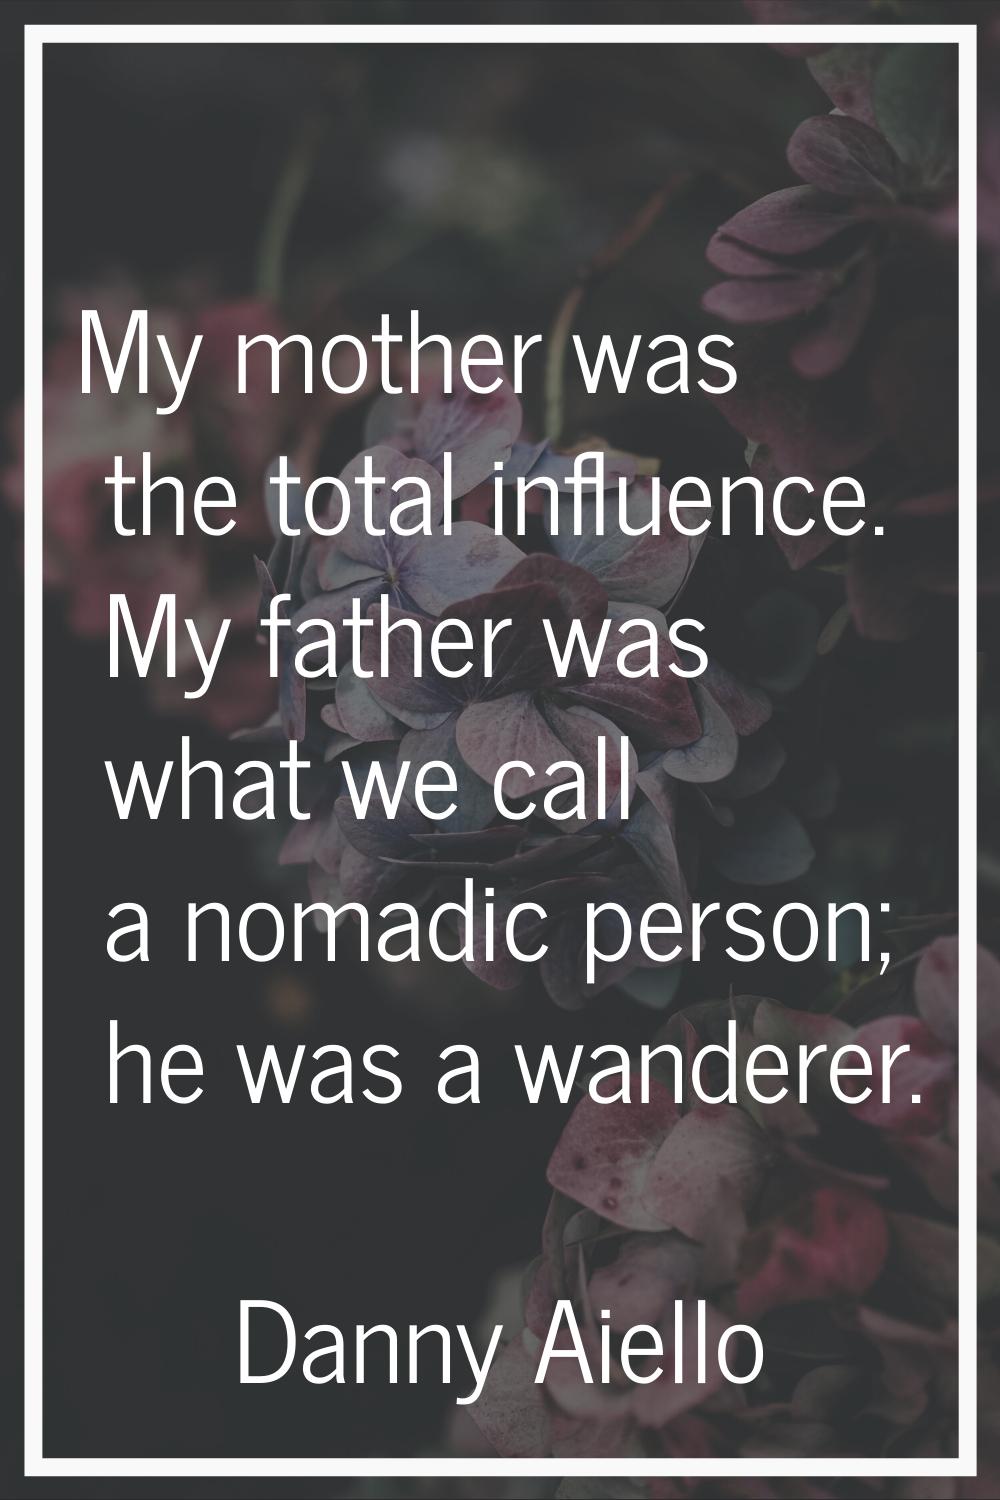 My mother was the total influence. My father was what we call a nomadic person; he was a wanderer.